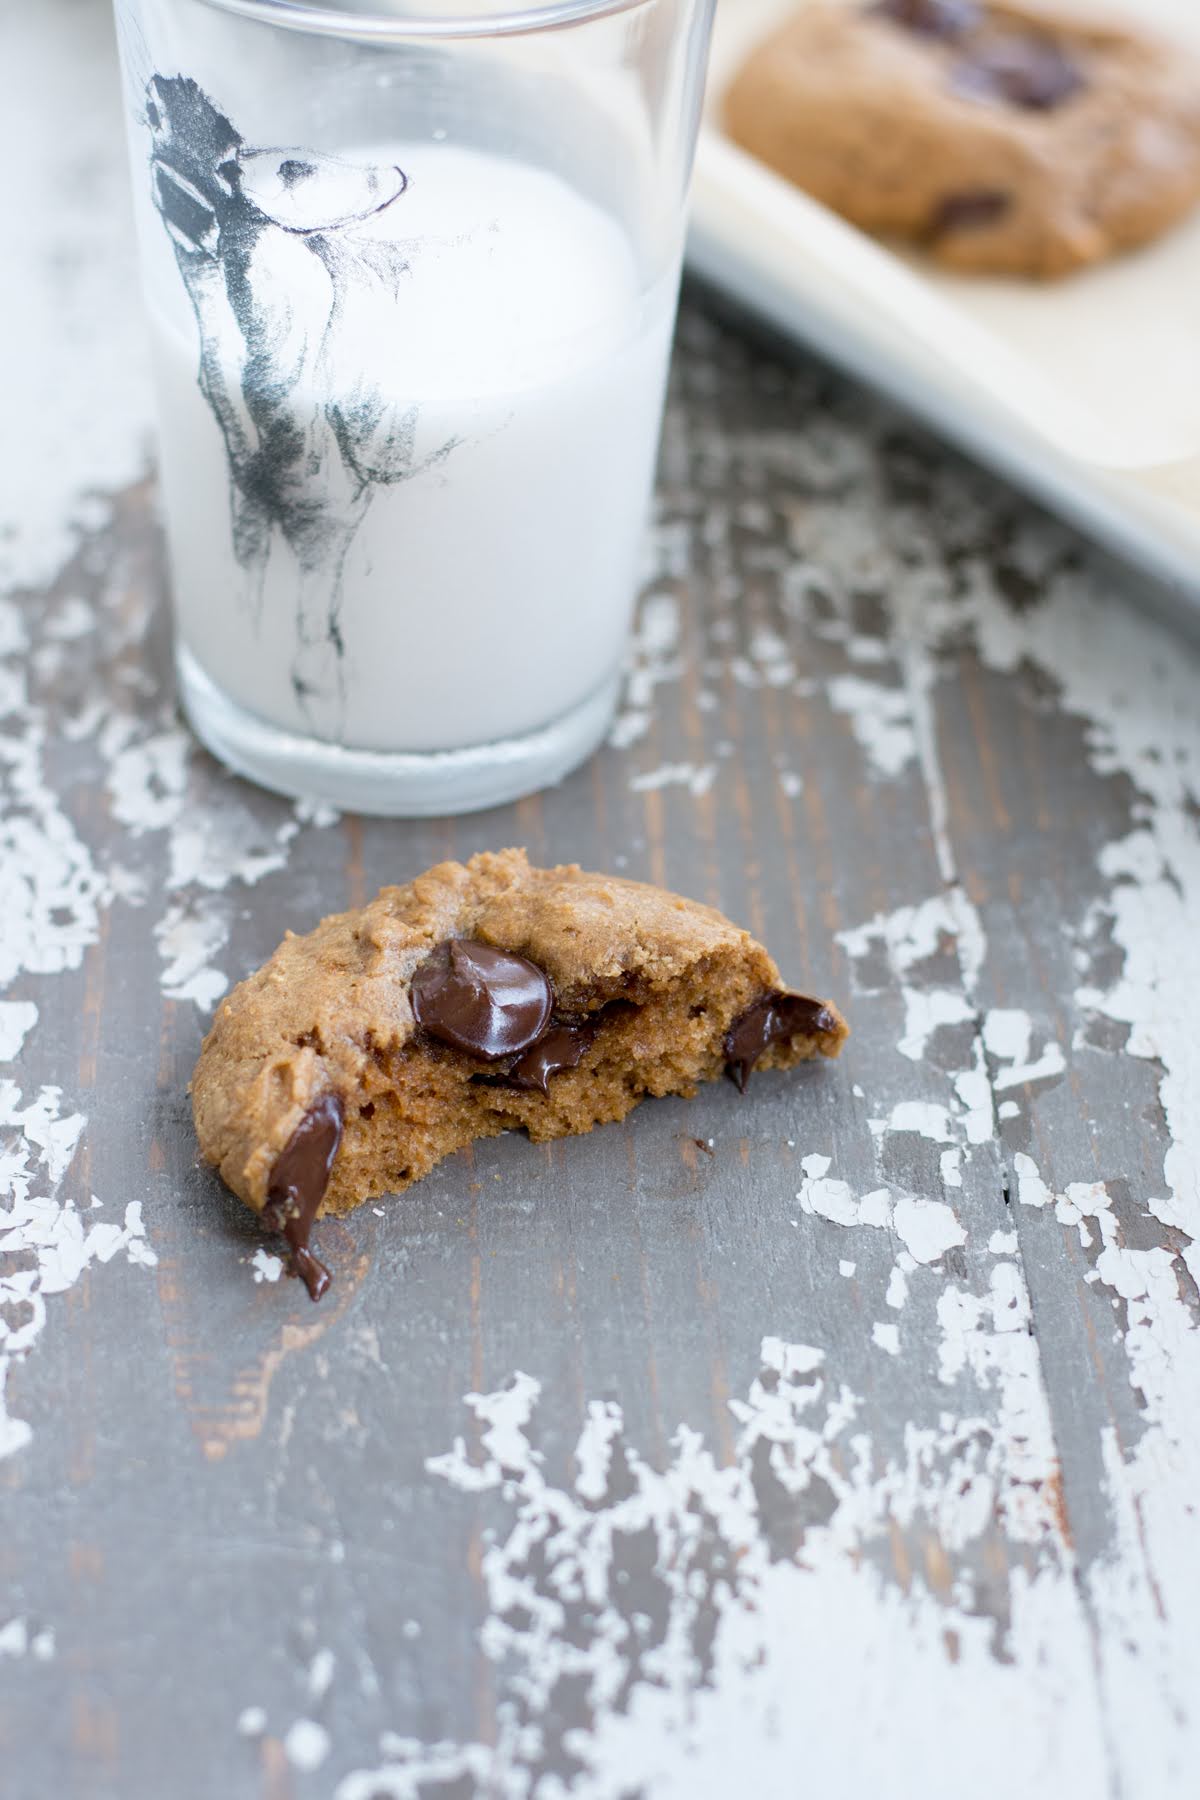 Half a protein cookie on a baking sheet next to a glass of milk.